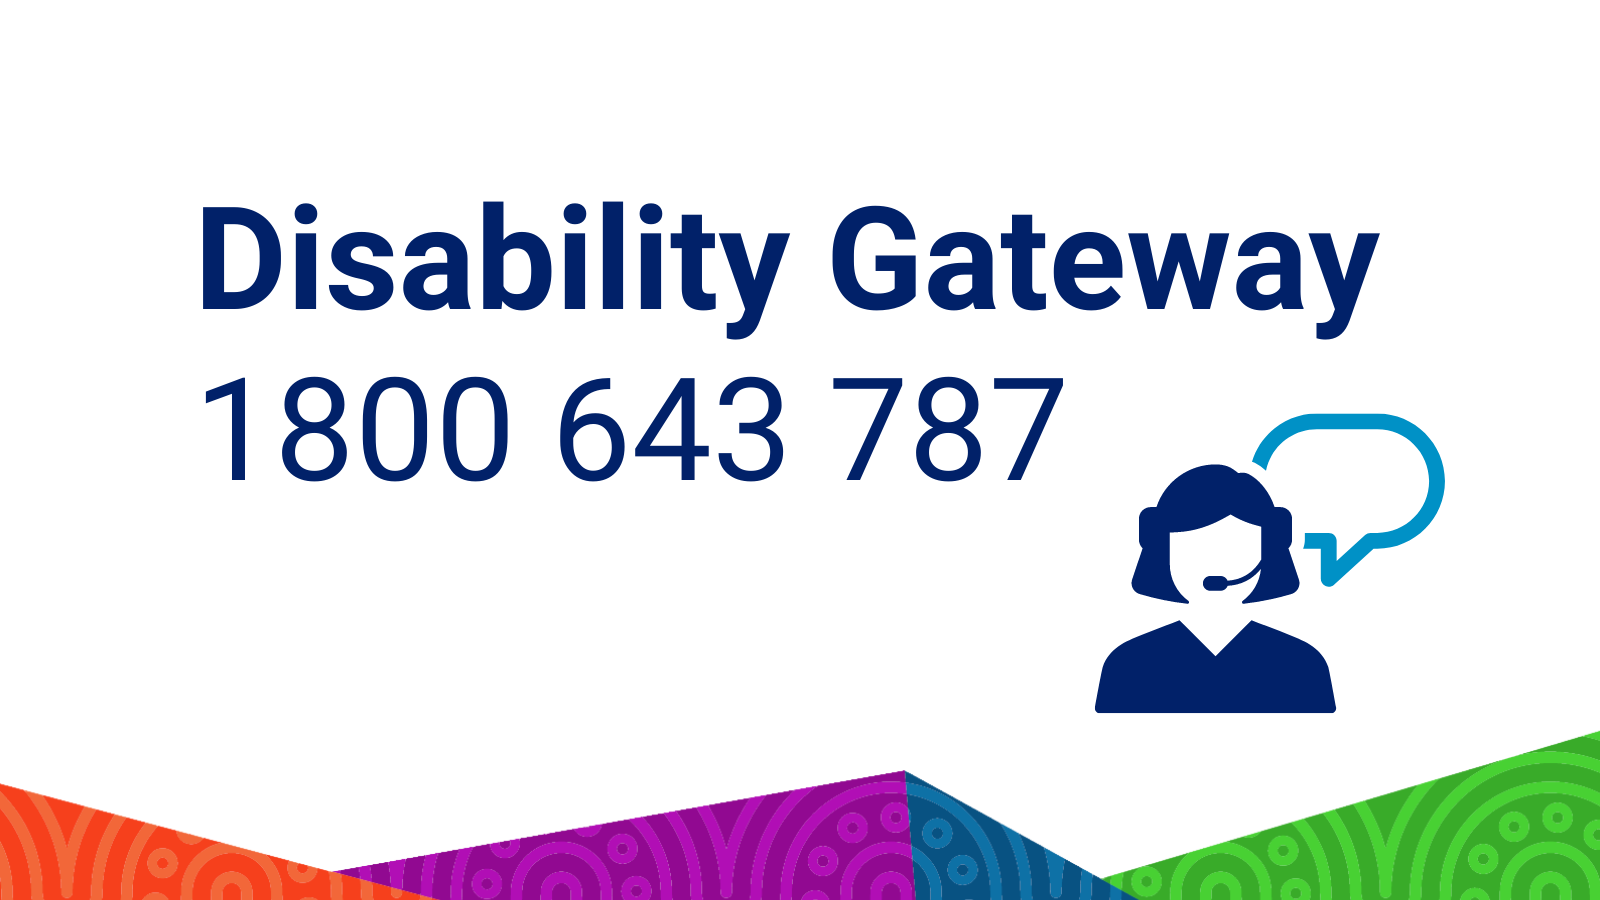 Contact Disability Gateway on 1800 643 787